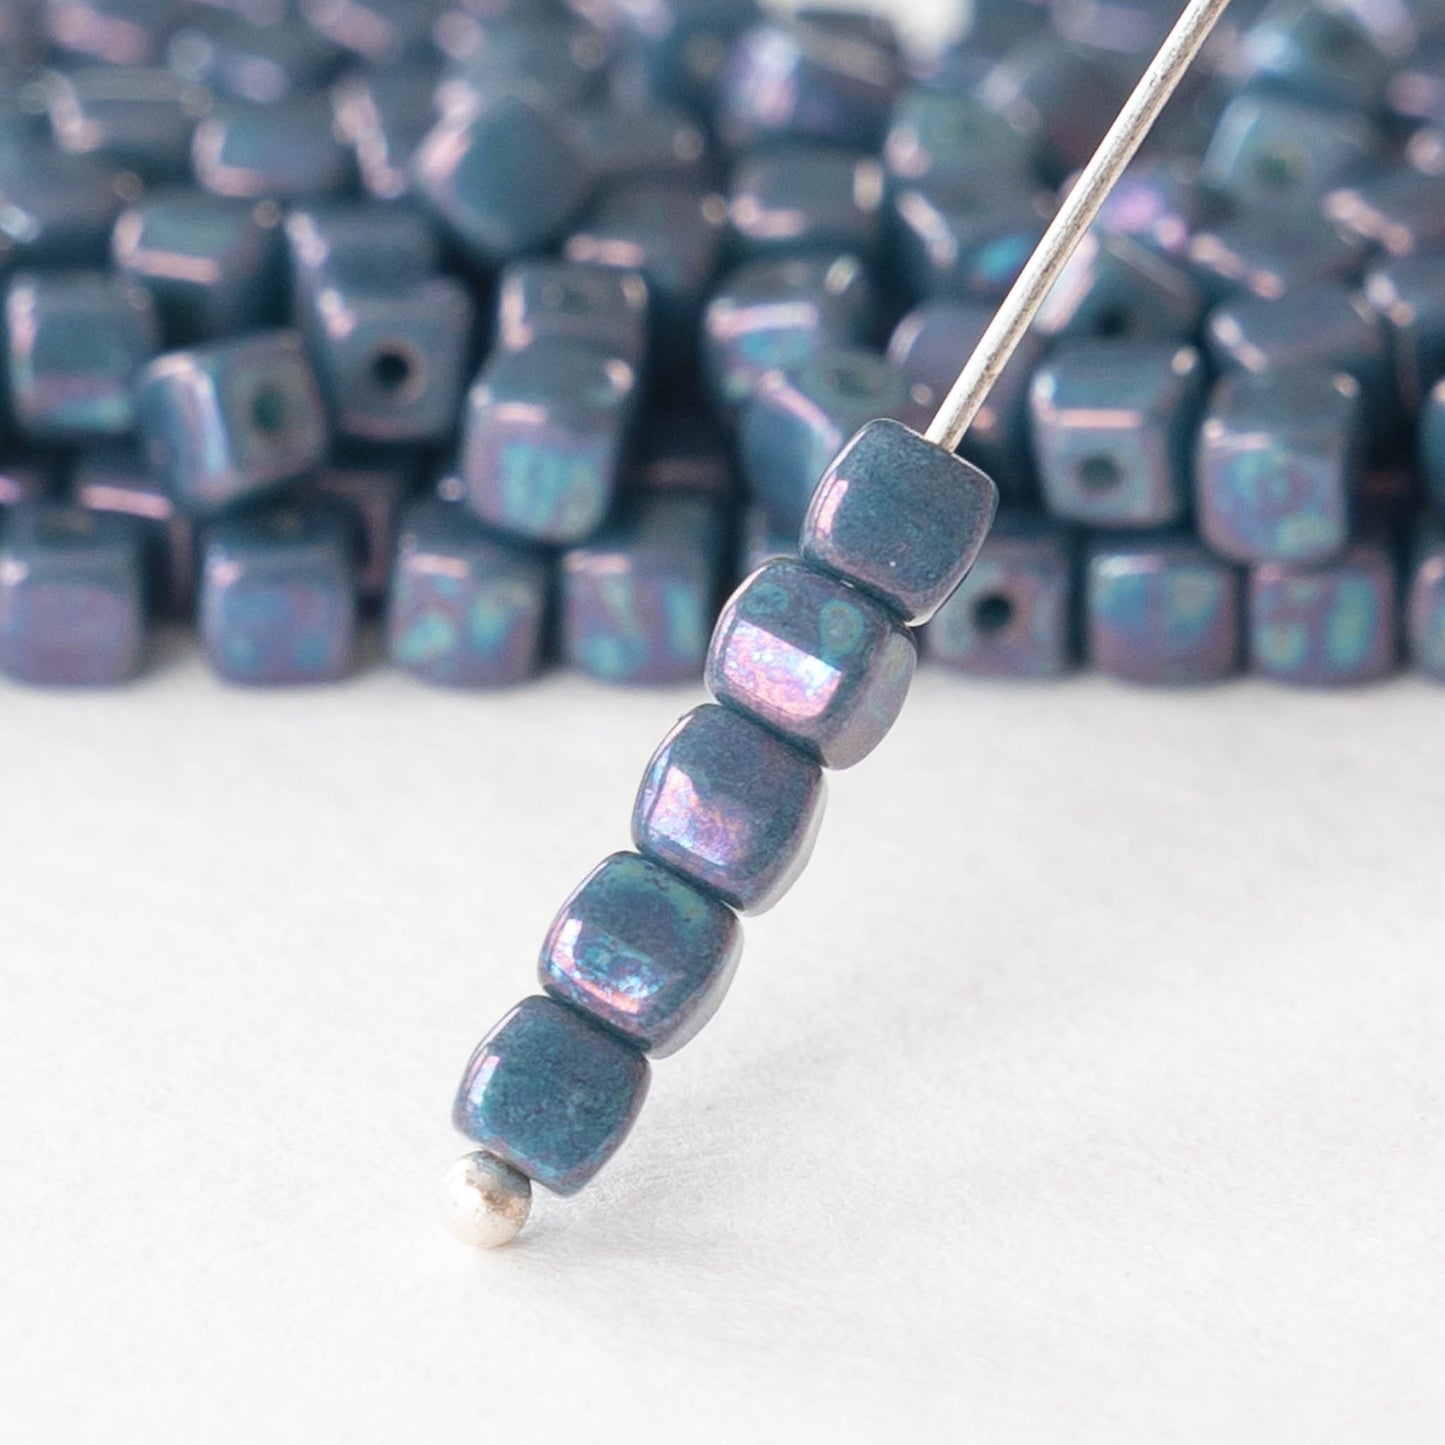 4mm Glass Cube Beads - Opaque Blue Purple Luster - 100 beads